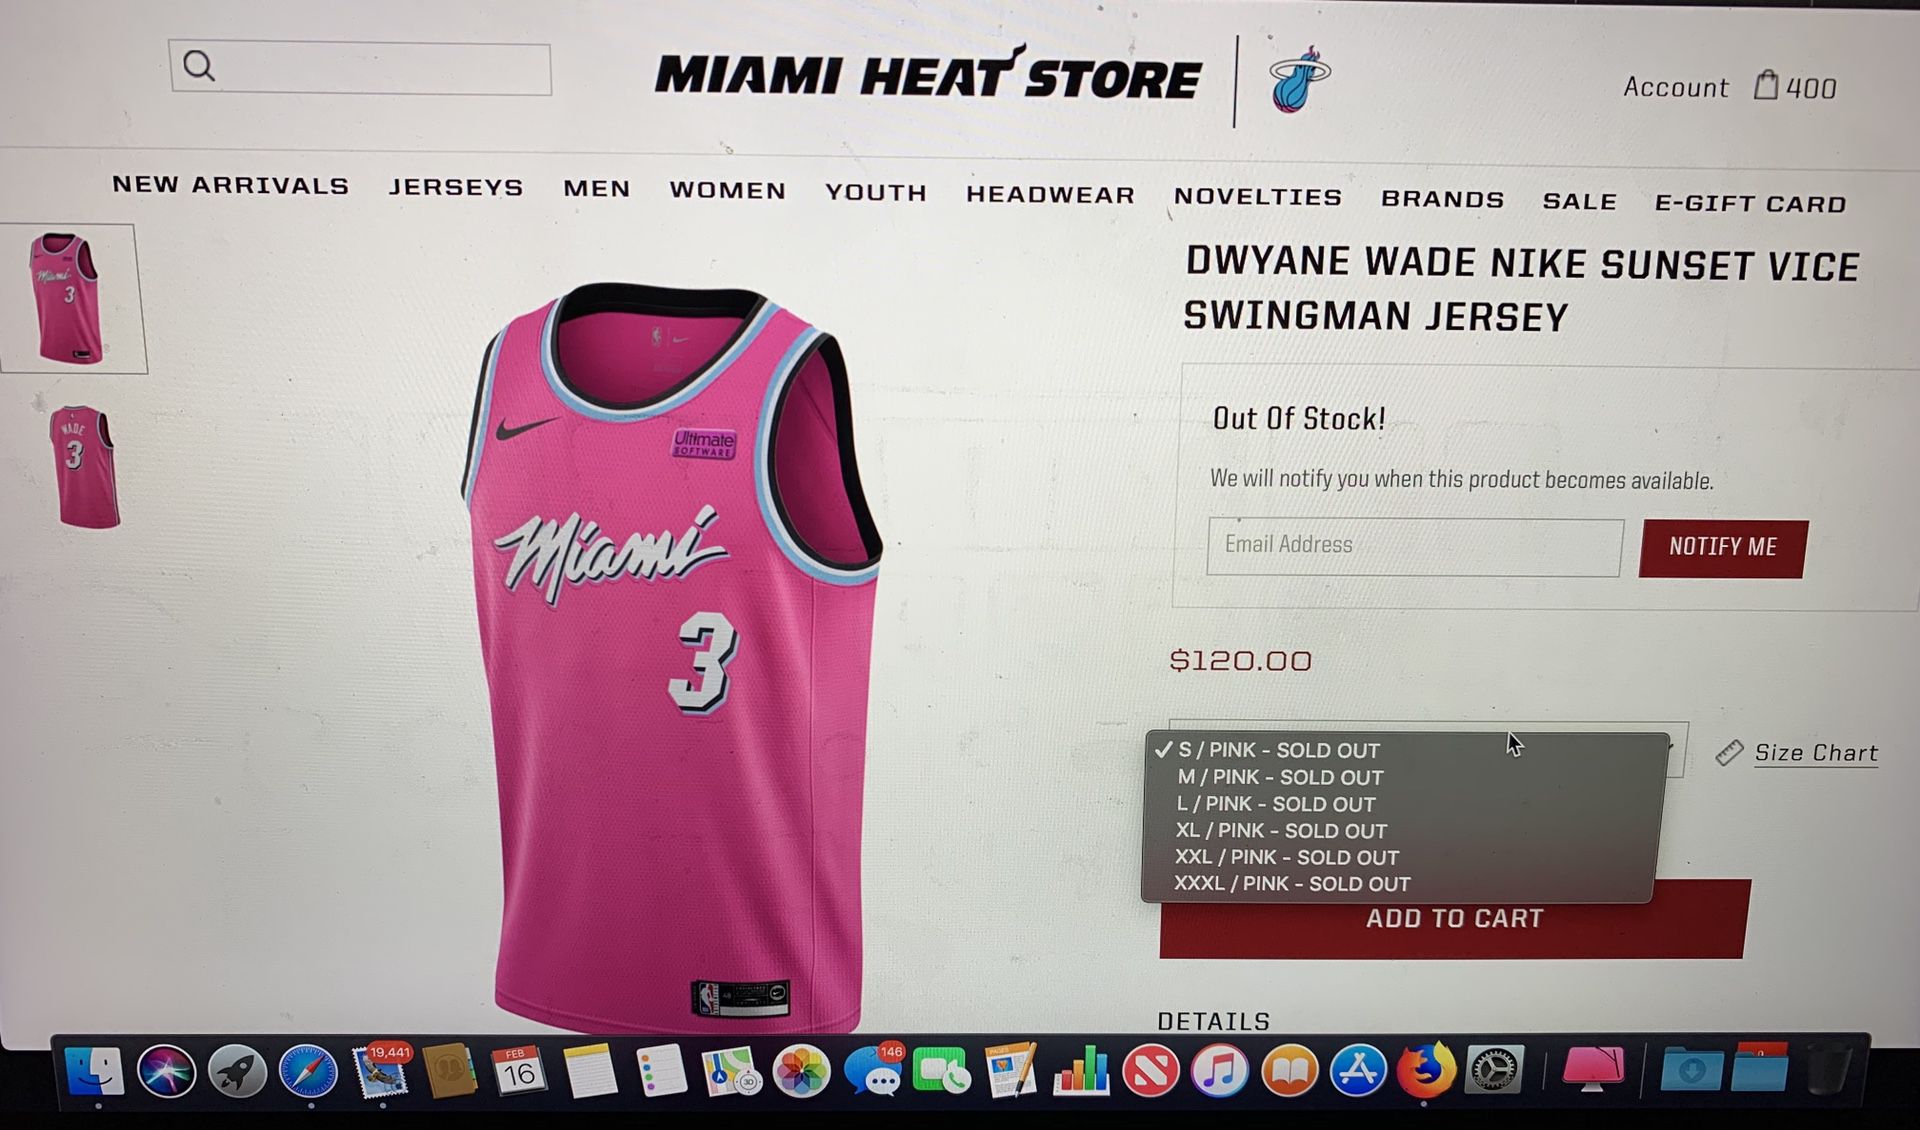 Sunset Vice' marks the latest chapter of the Miami Heat's